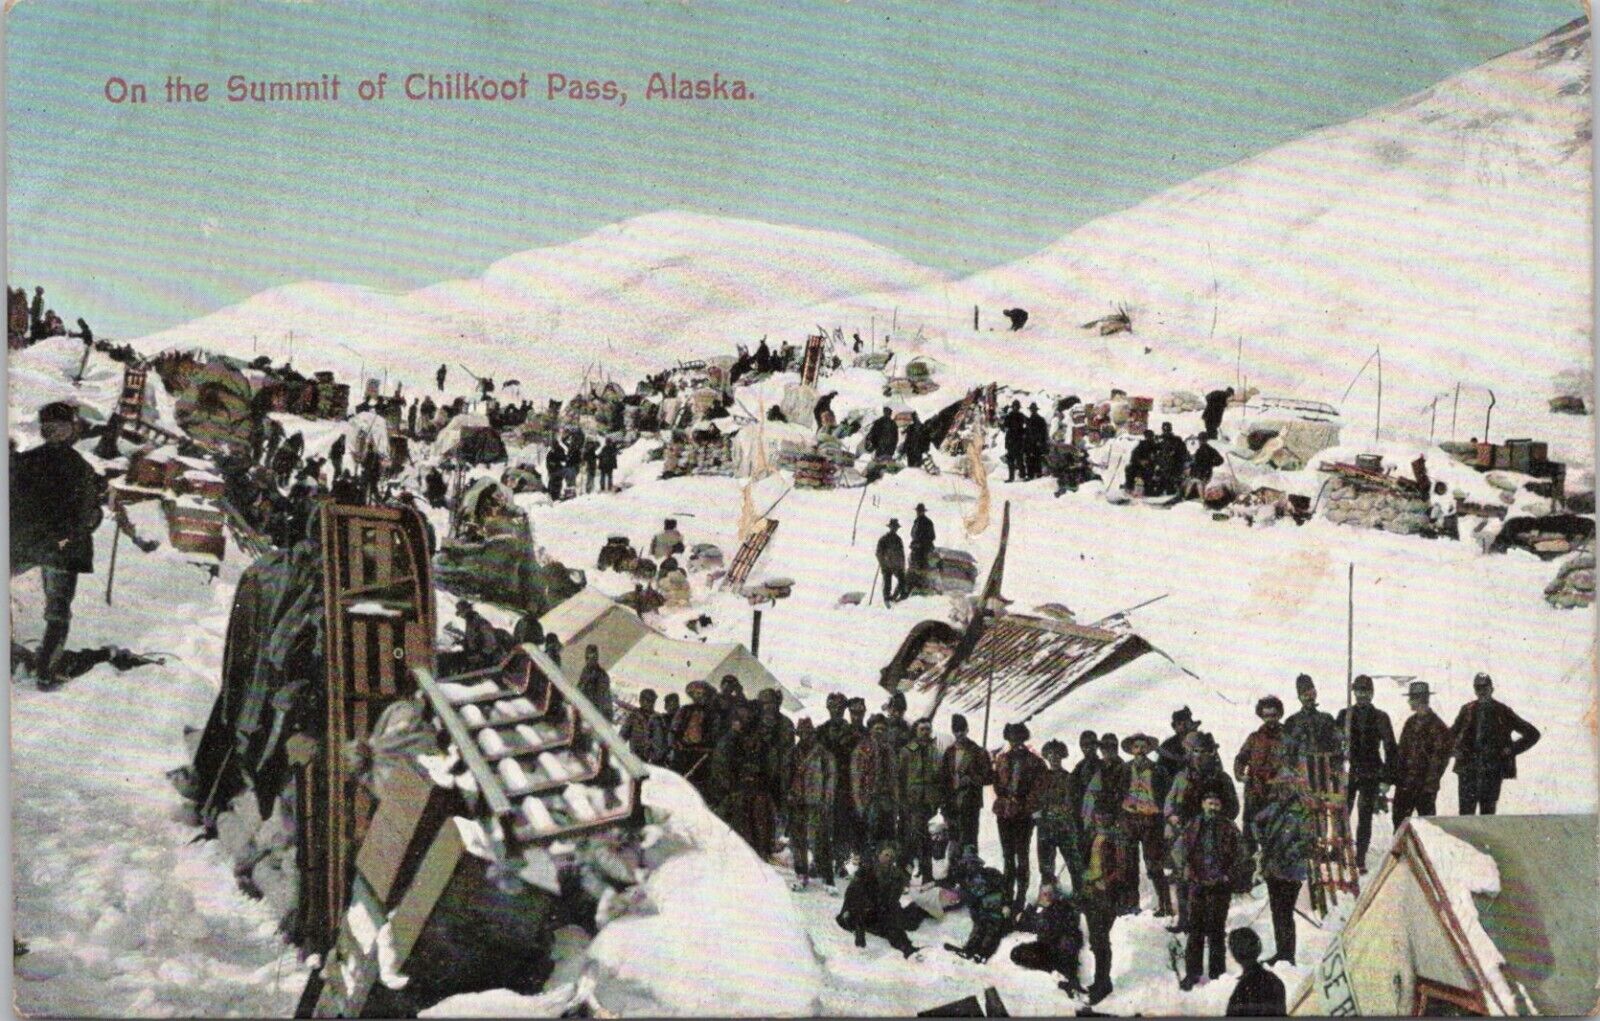 Lithograph- Alaska Busy Mining Camp Scene at Chilkoot Pass Summit early 1900s